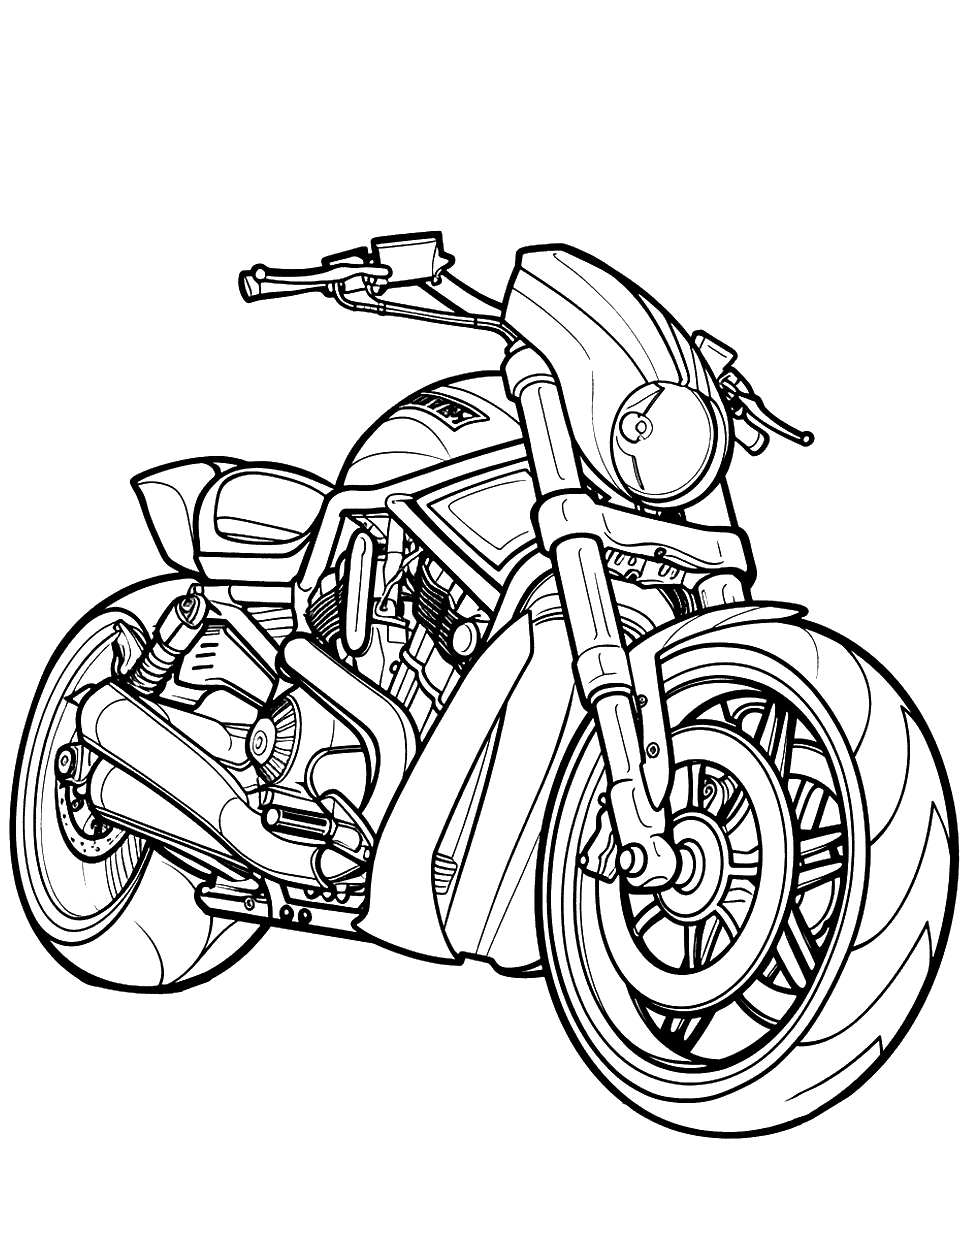 Hot Wheels Motorcycle Coloring Page - A stylized Hot Wheels motorcycle ready for racing action.